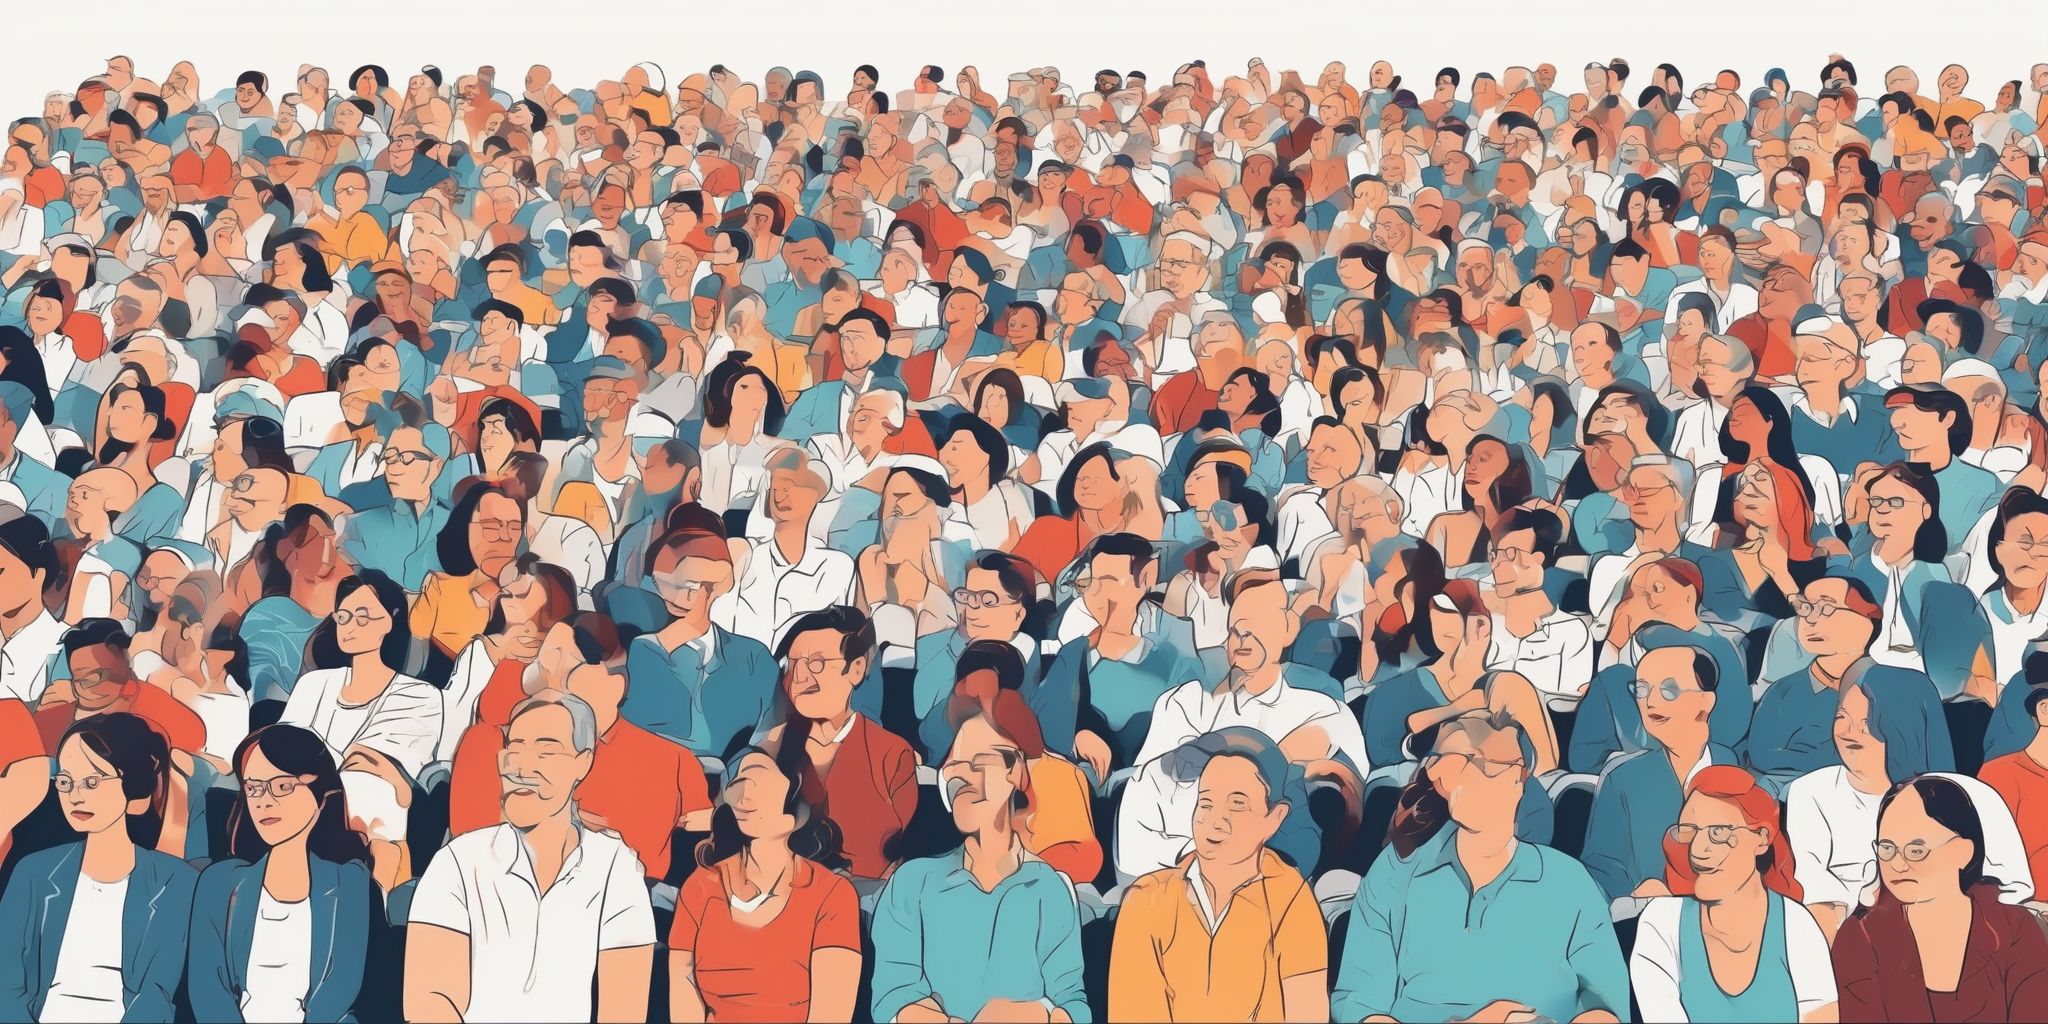 audience in illustration style with gradients and white background